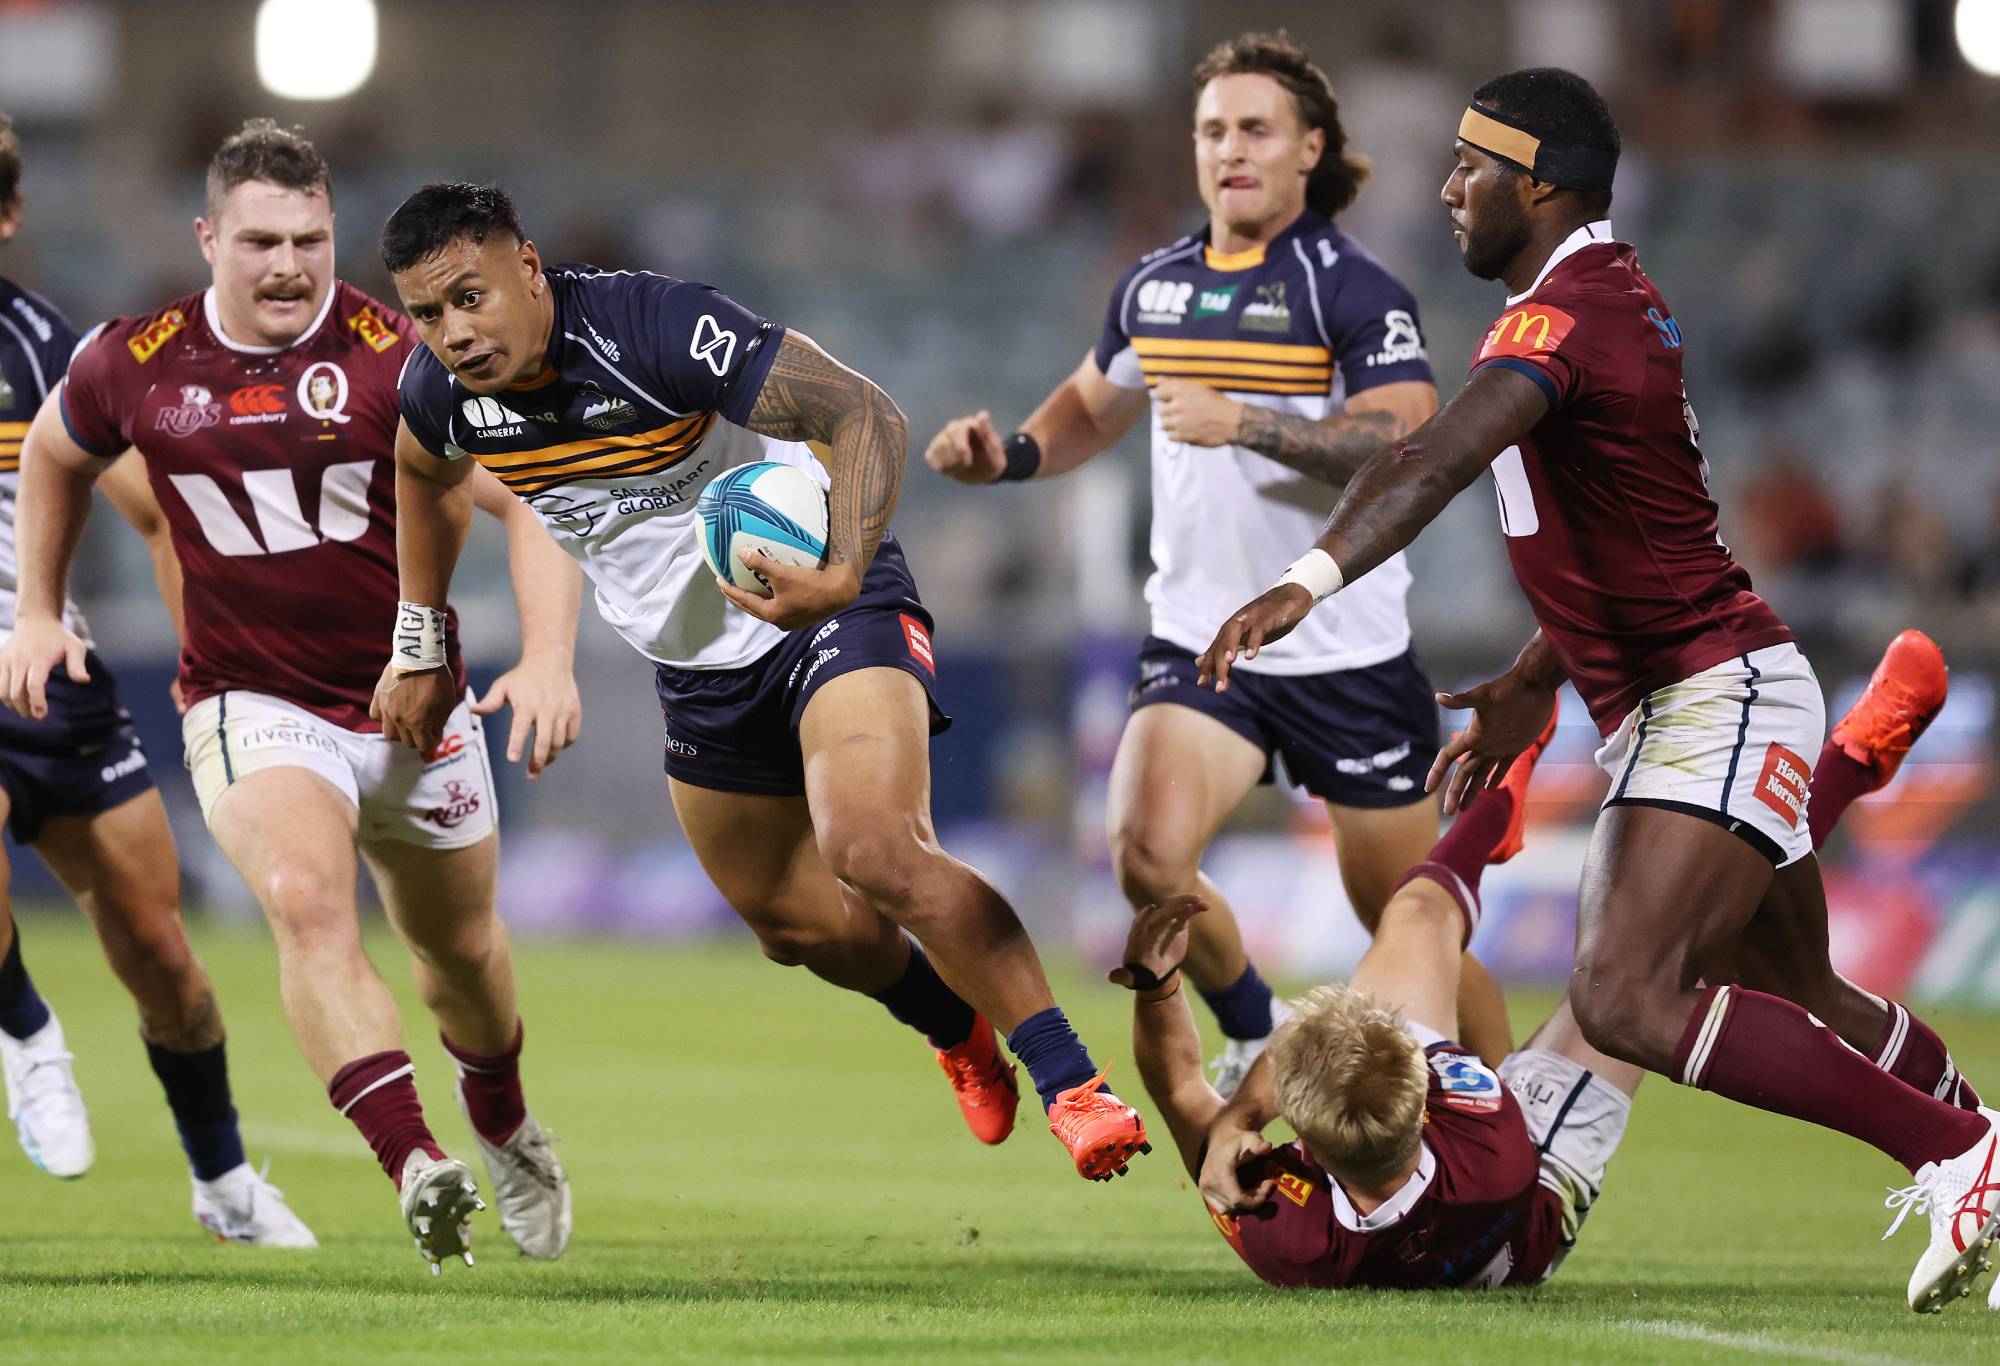 Len Ikitau of the Brumbies breaks through the tackle of Tom Lynagh of the Reds